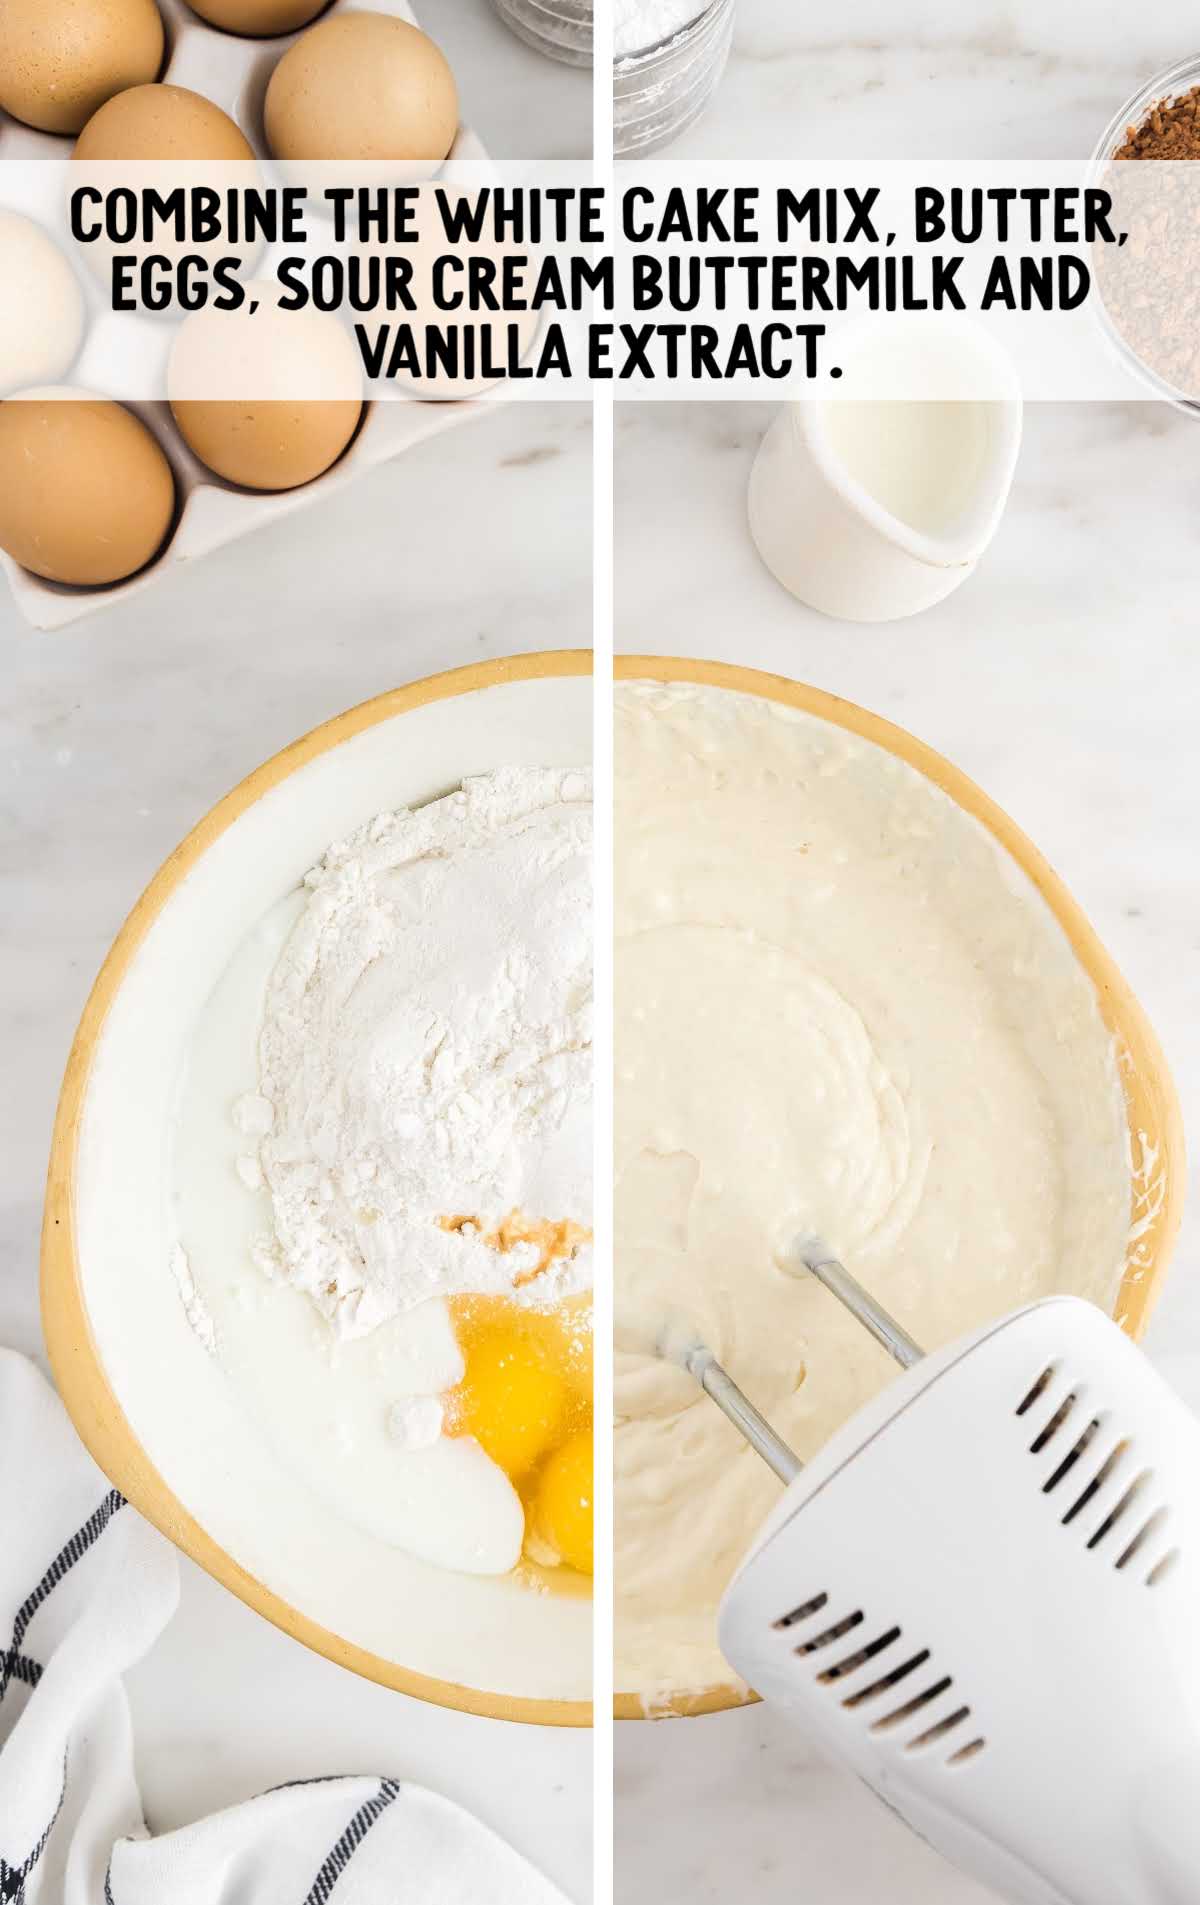 white cake mix, butter, eggs, sour cream buttermilk and vanilla extract being blended together in a bowl